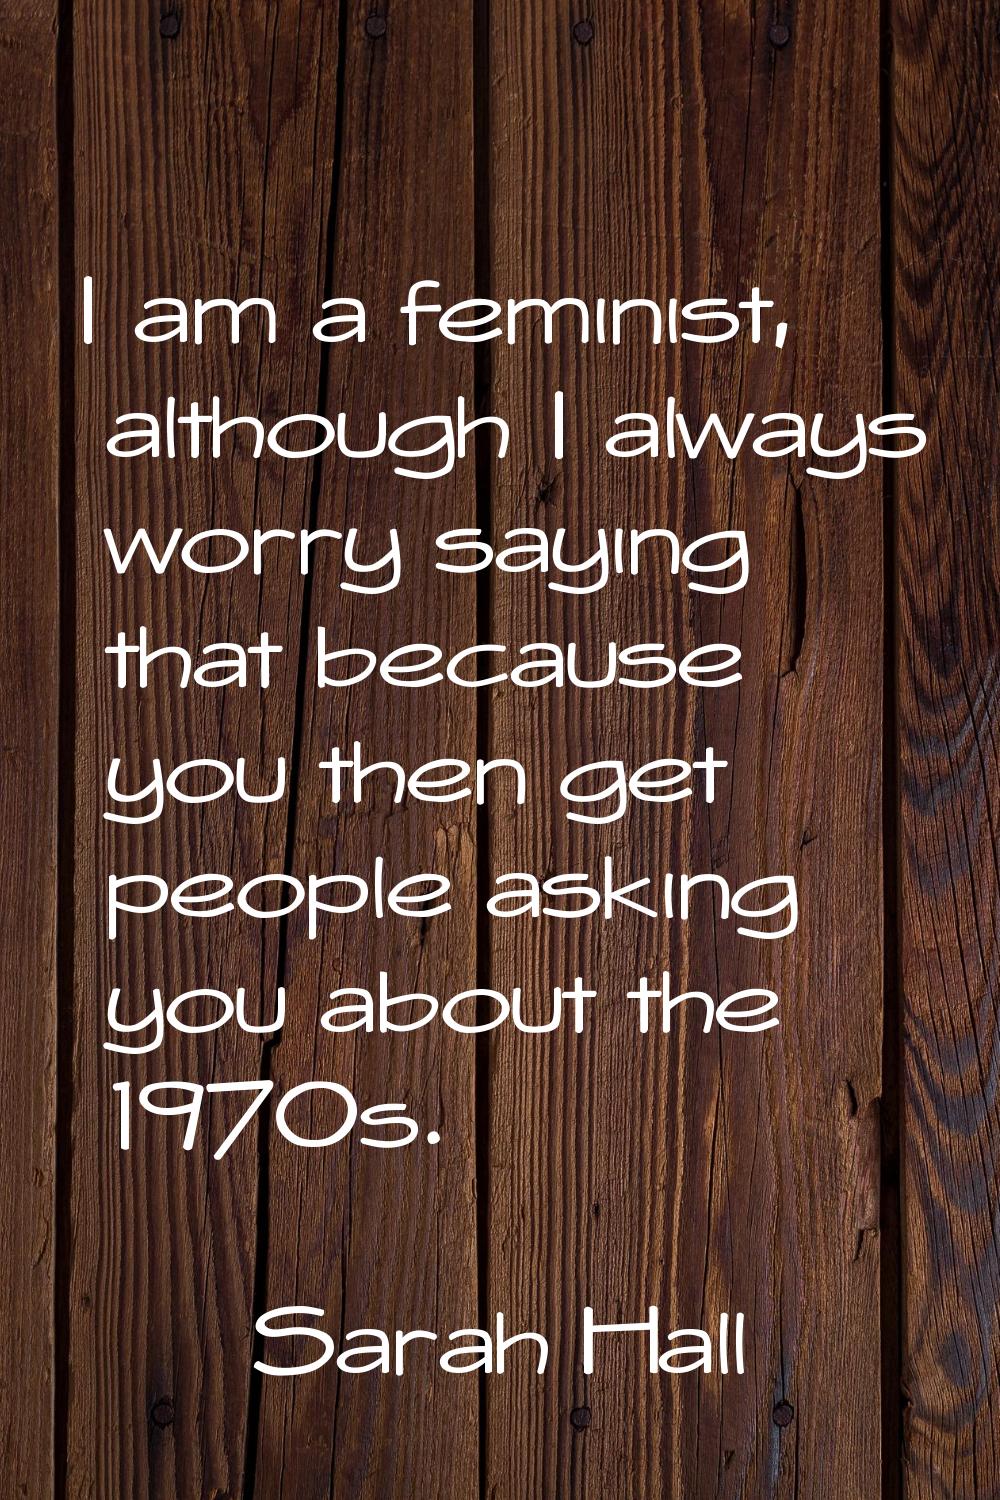 I am a feminist, although I always worry saying that because you then get people asking you about t